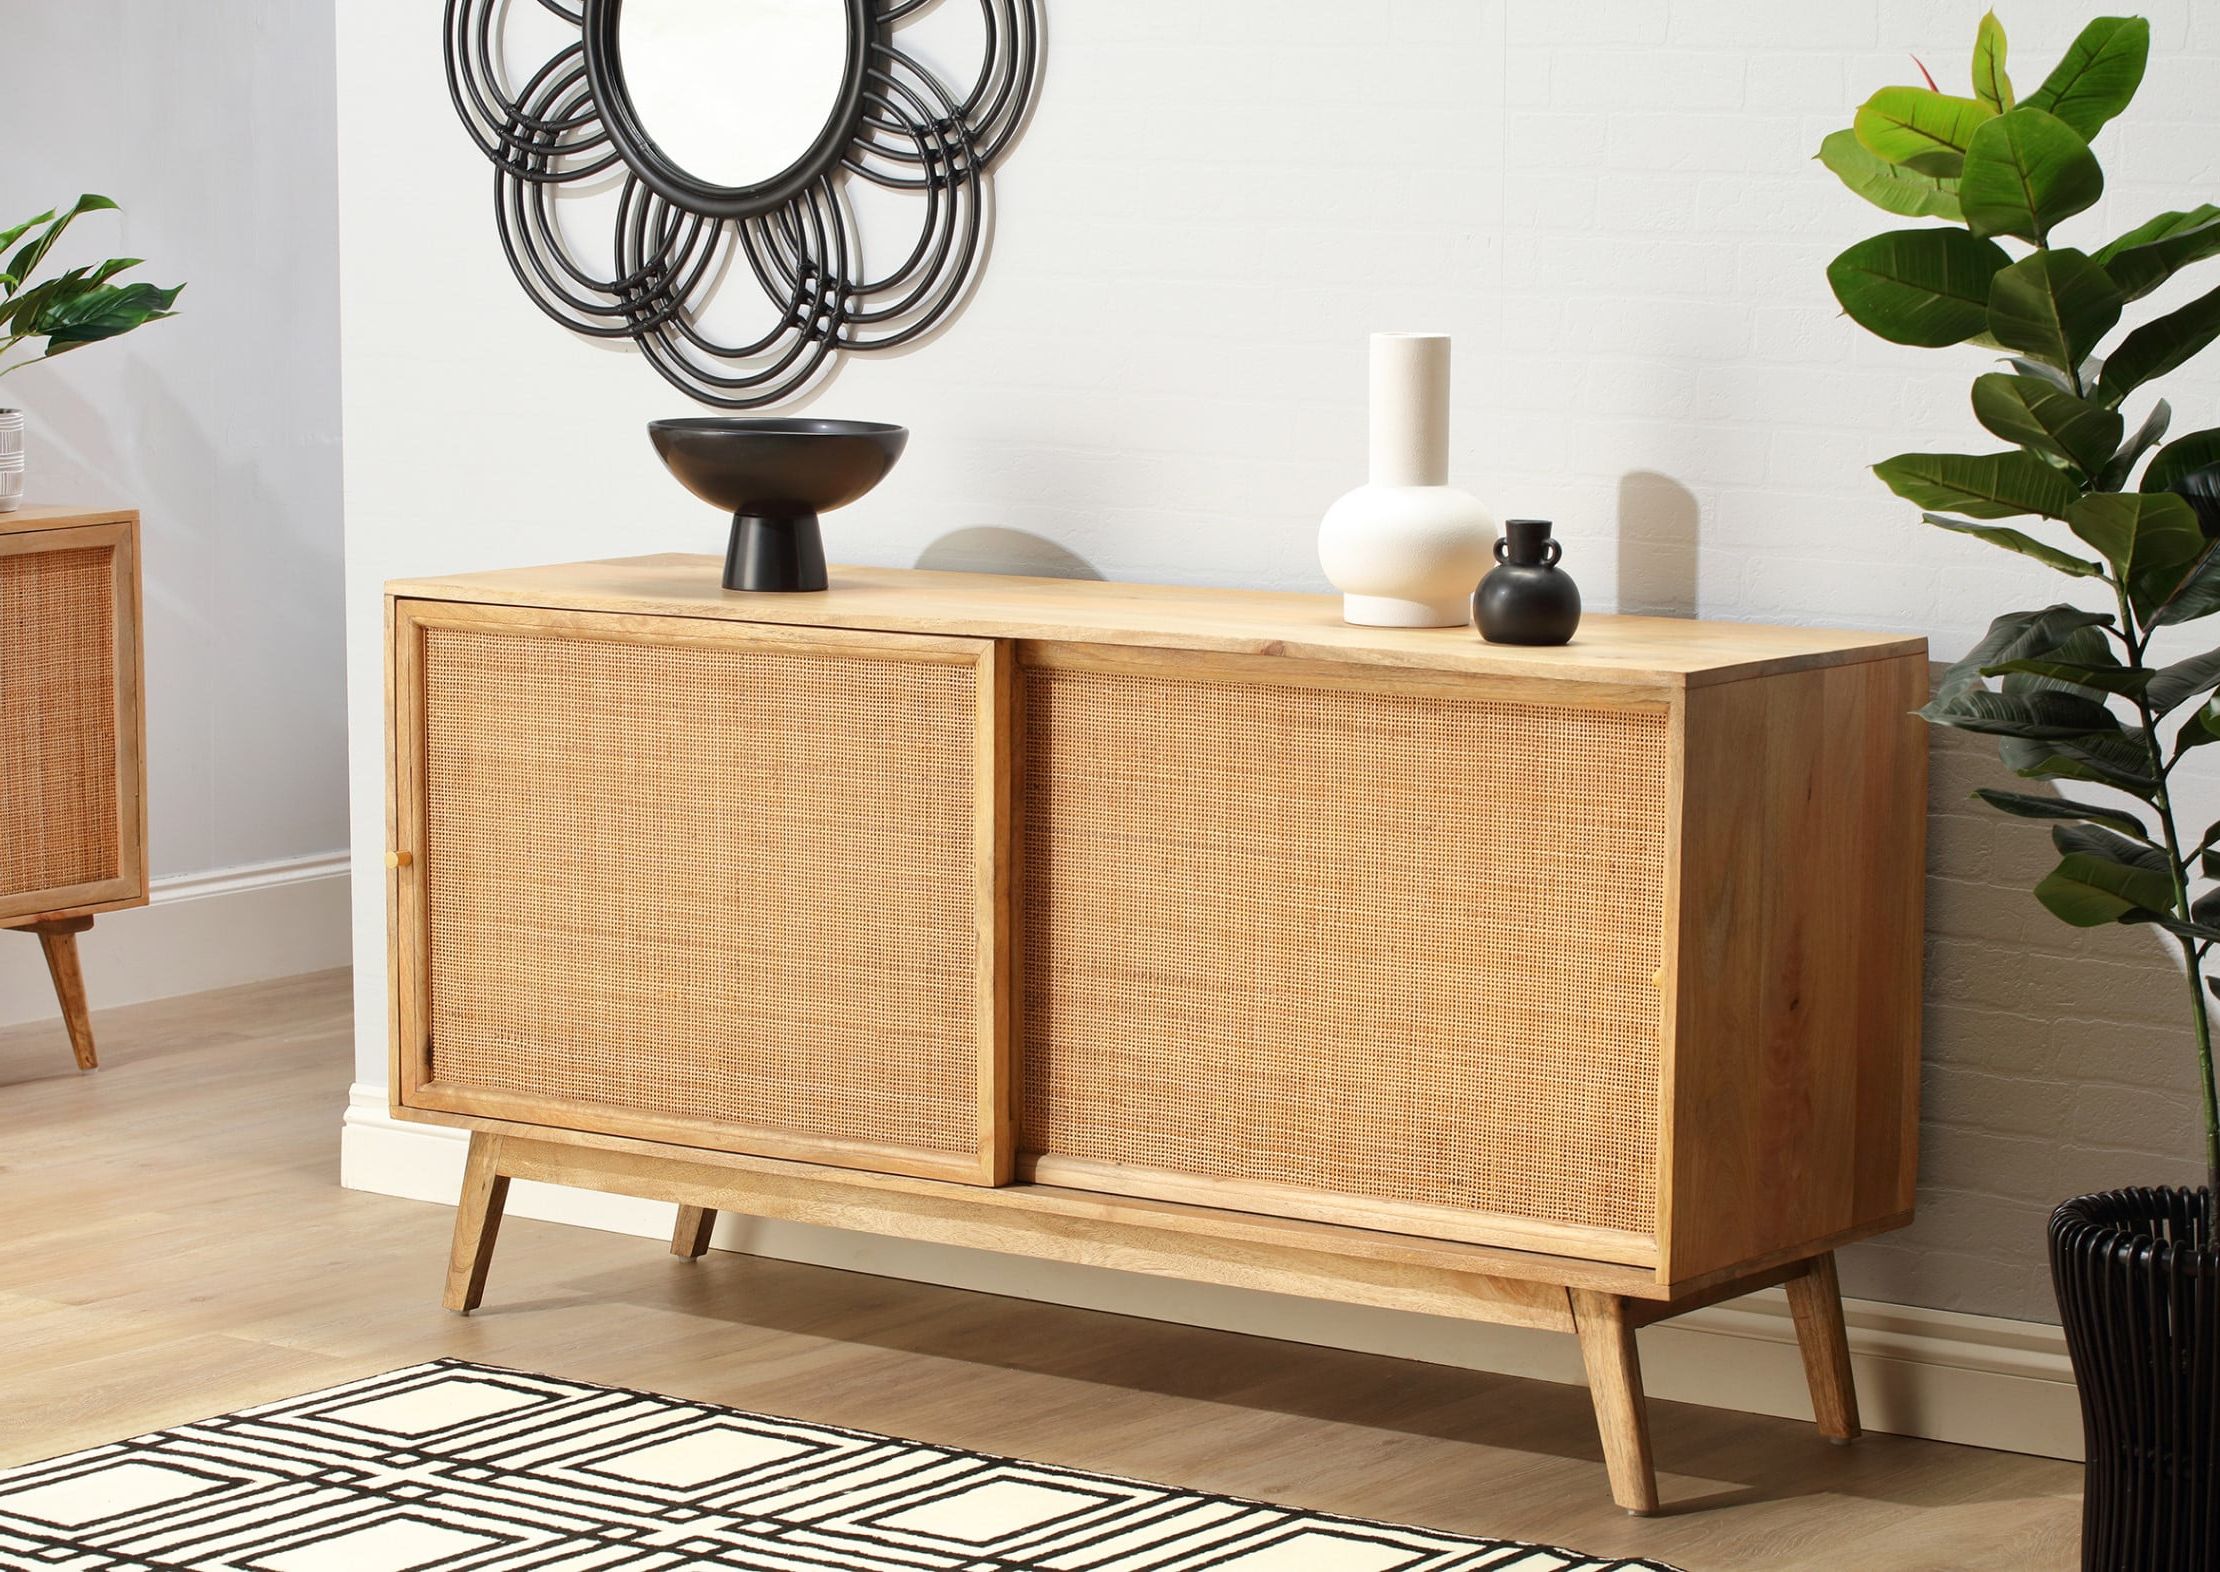 2019 Assembled Rattan Sideboards Intended For Manhattan Mango Wood Sideboard With Natural Rattan Doors (View 10 of 15)